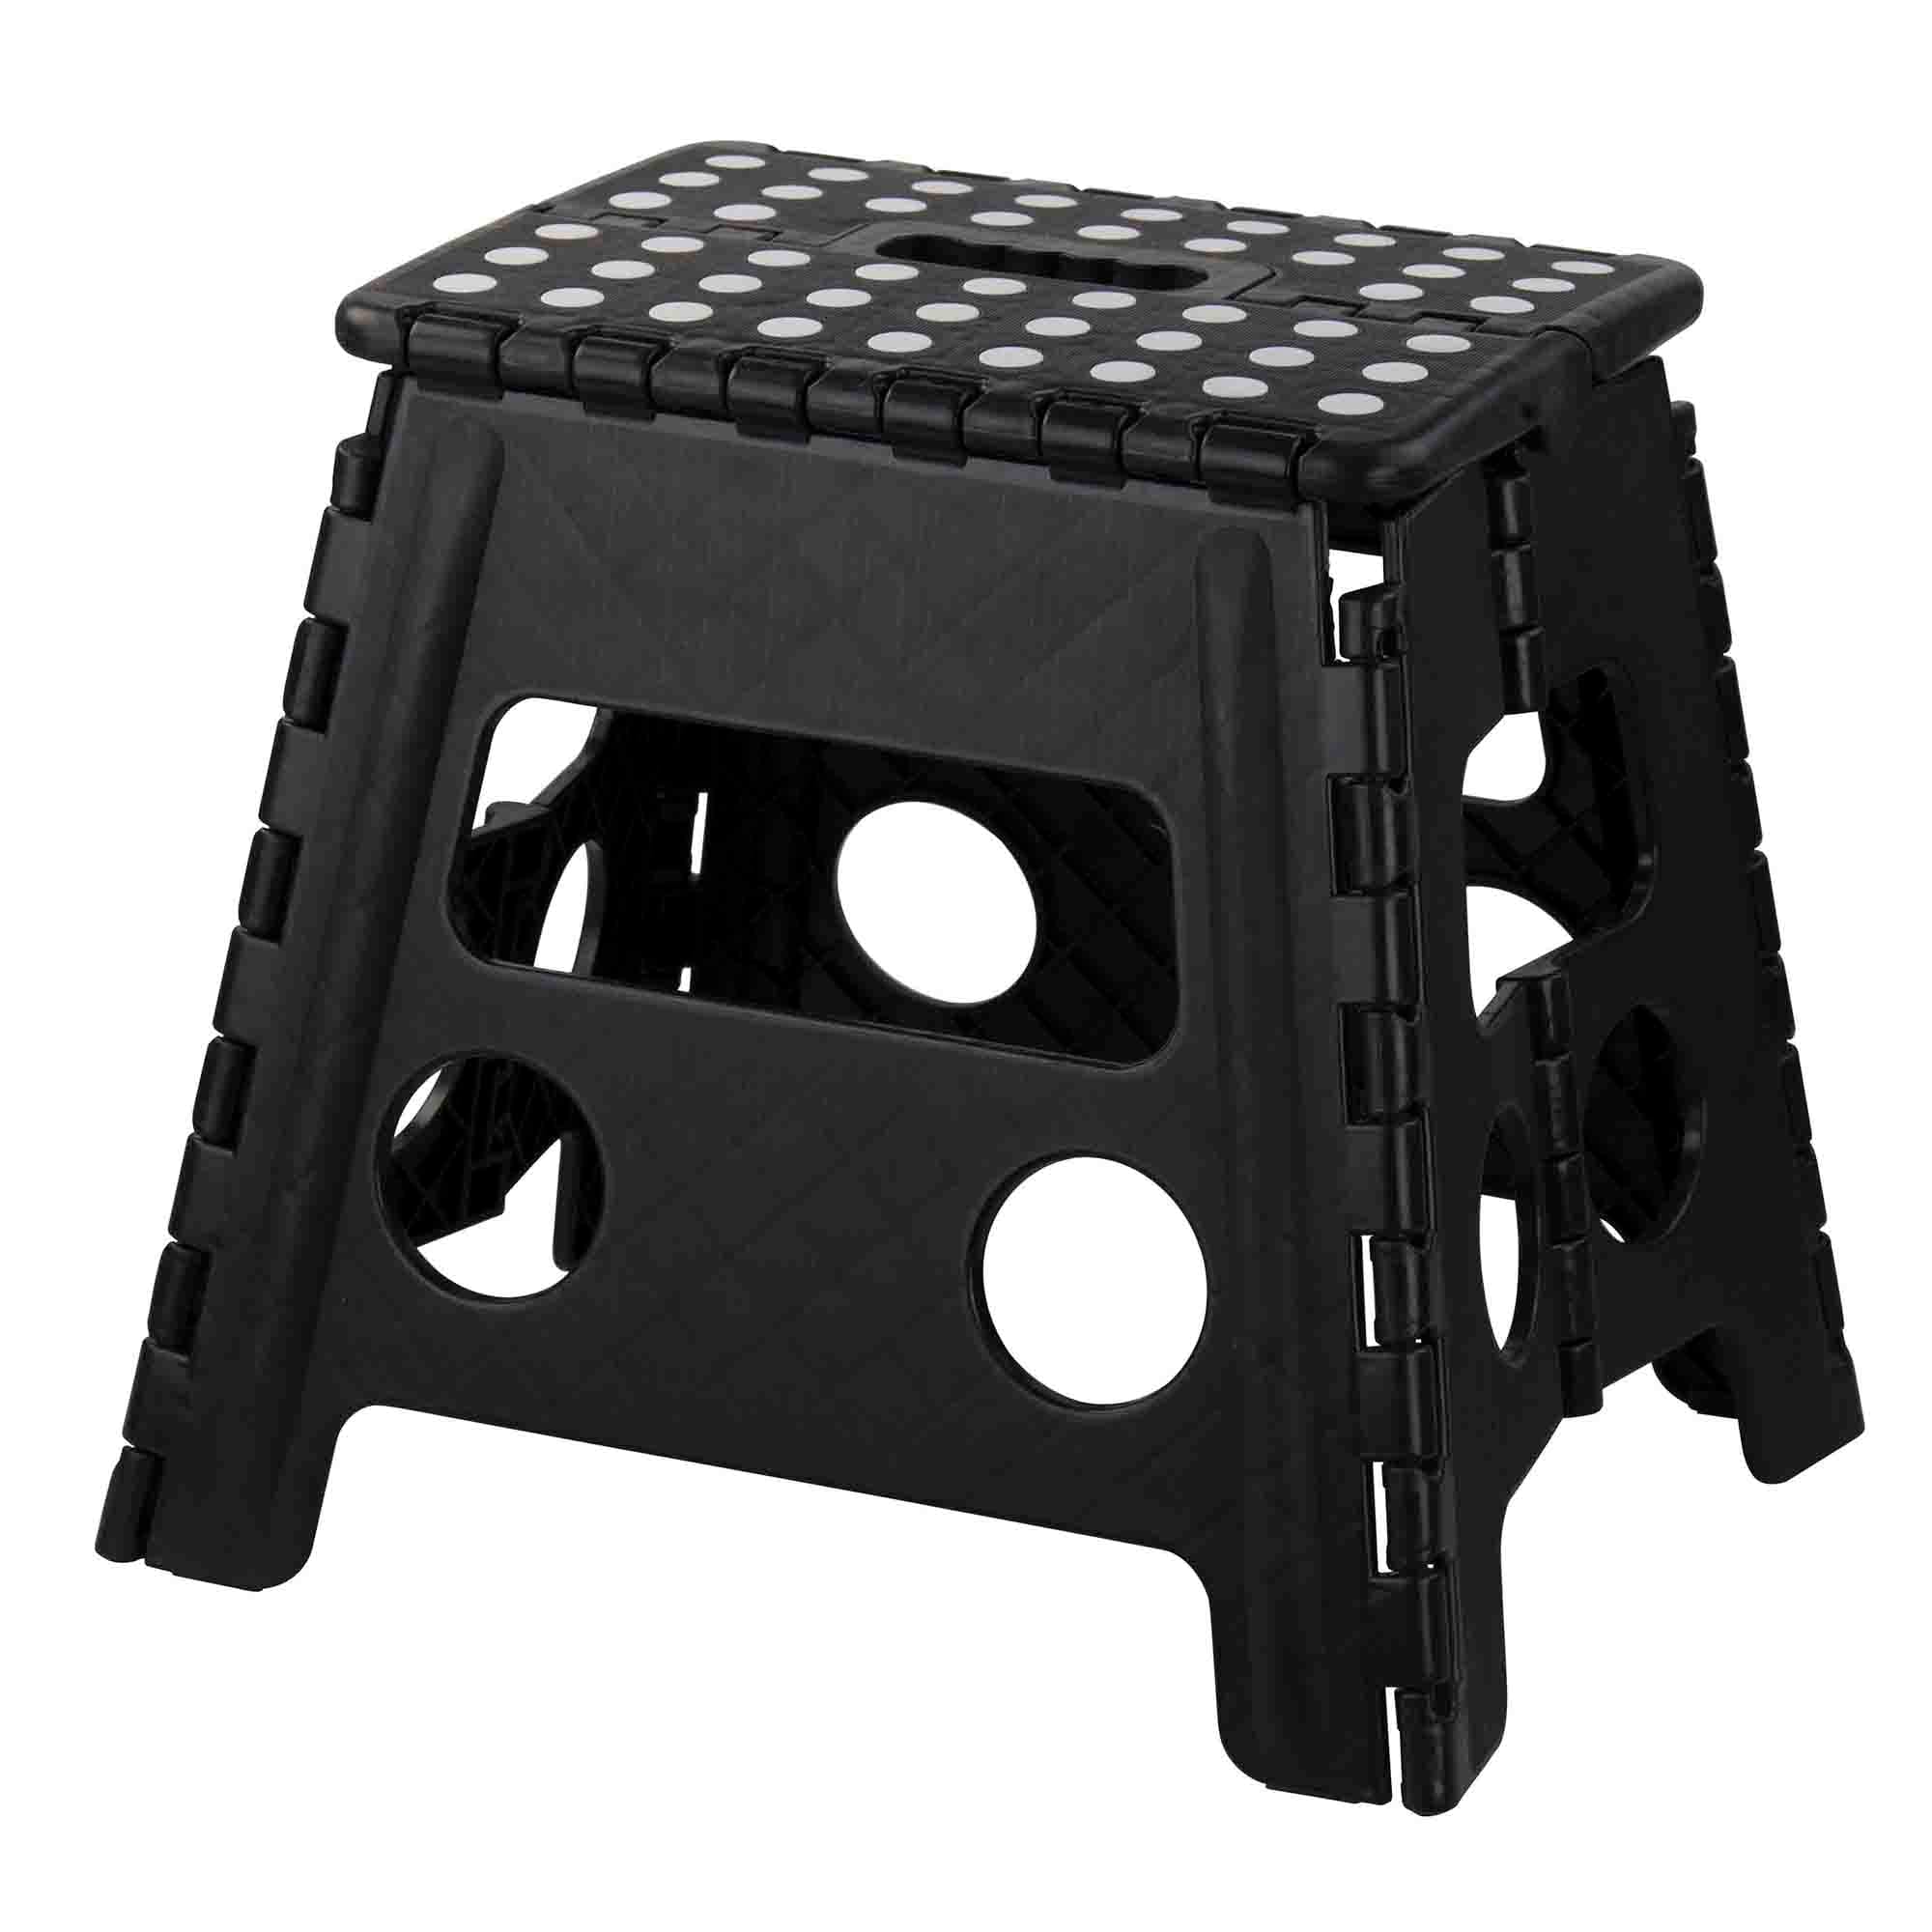 Home Basics Large Foldable Plastic Stool with Non-Slip Dots, Black $8.00 EACH, CASE PACK OF 12